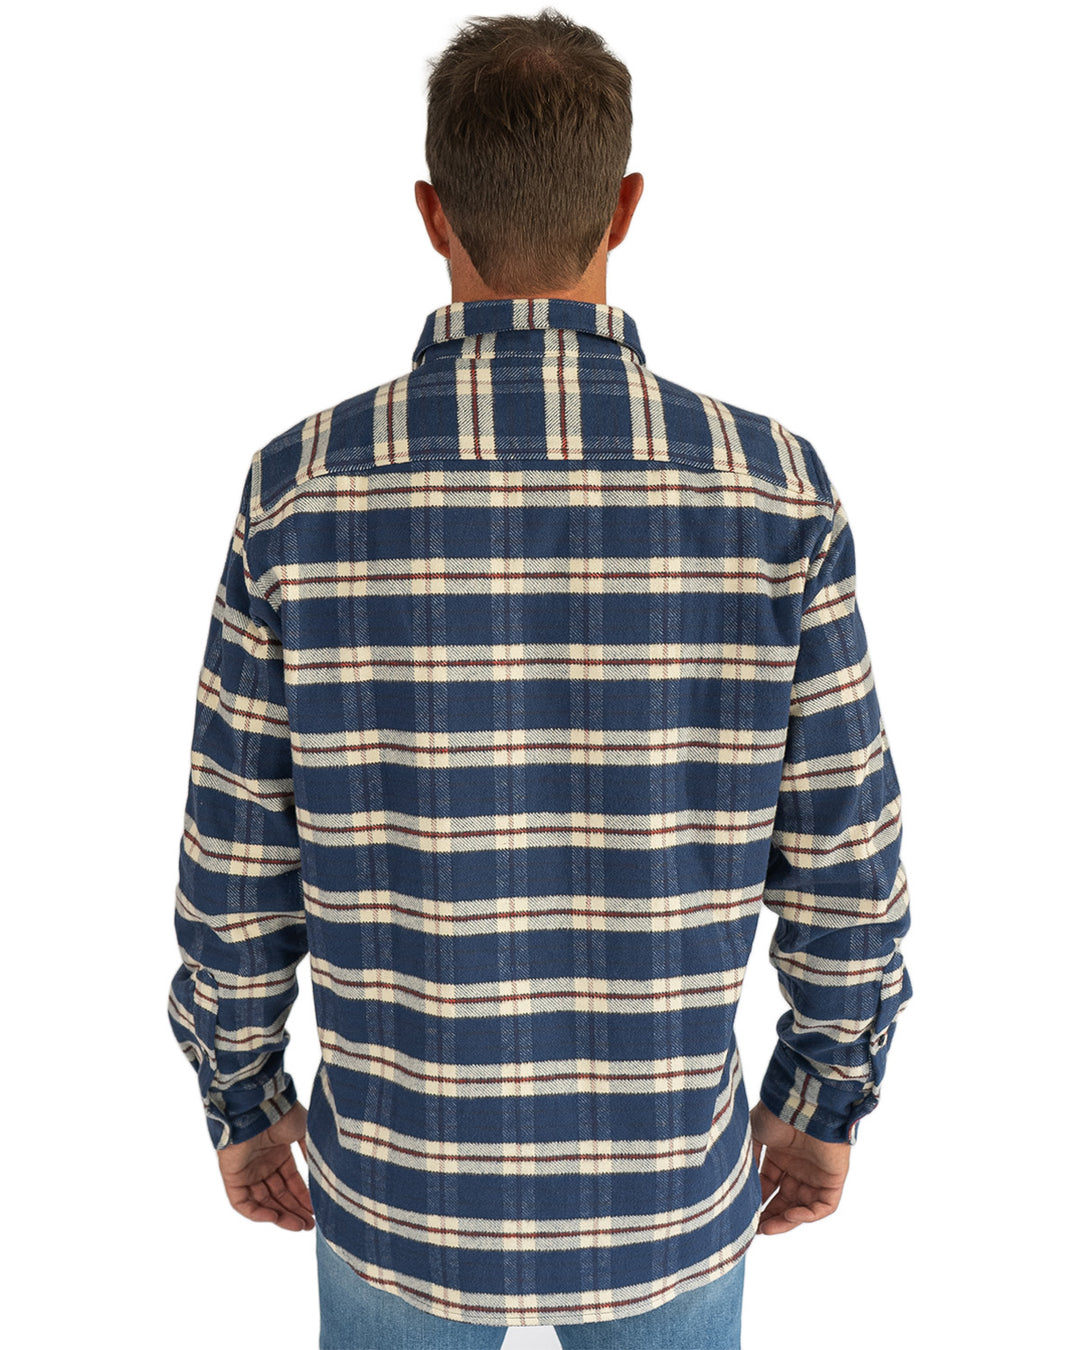 Grand Flannel in Navy Plaid, 100% Cotton Flannel Shirt for Men by MuskOx